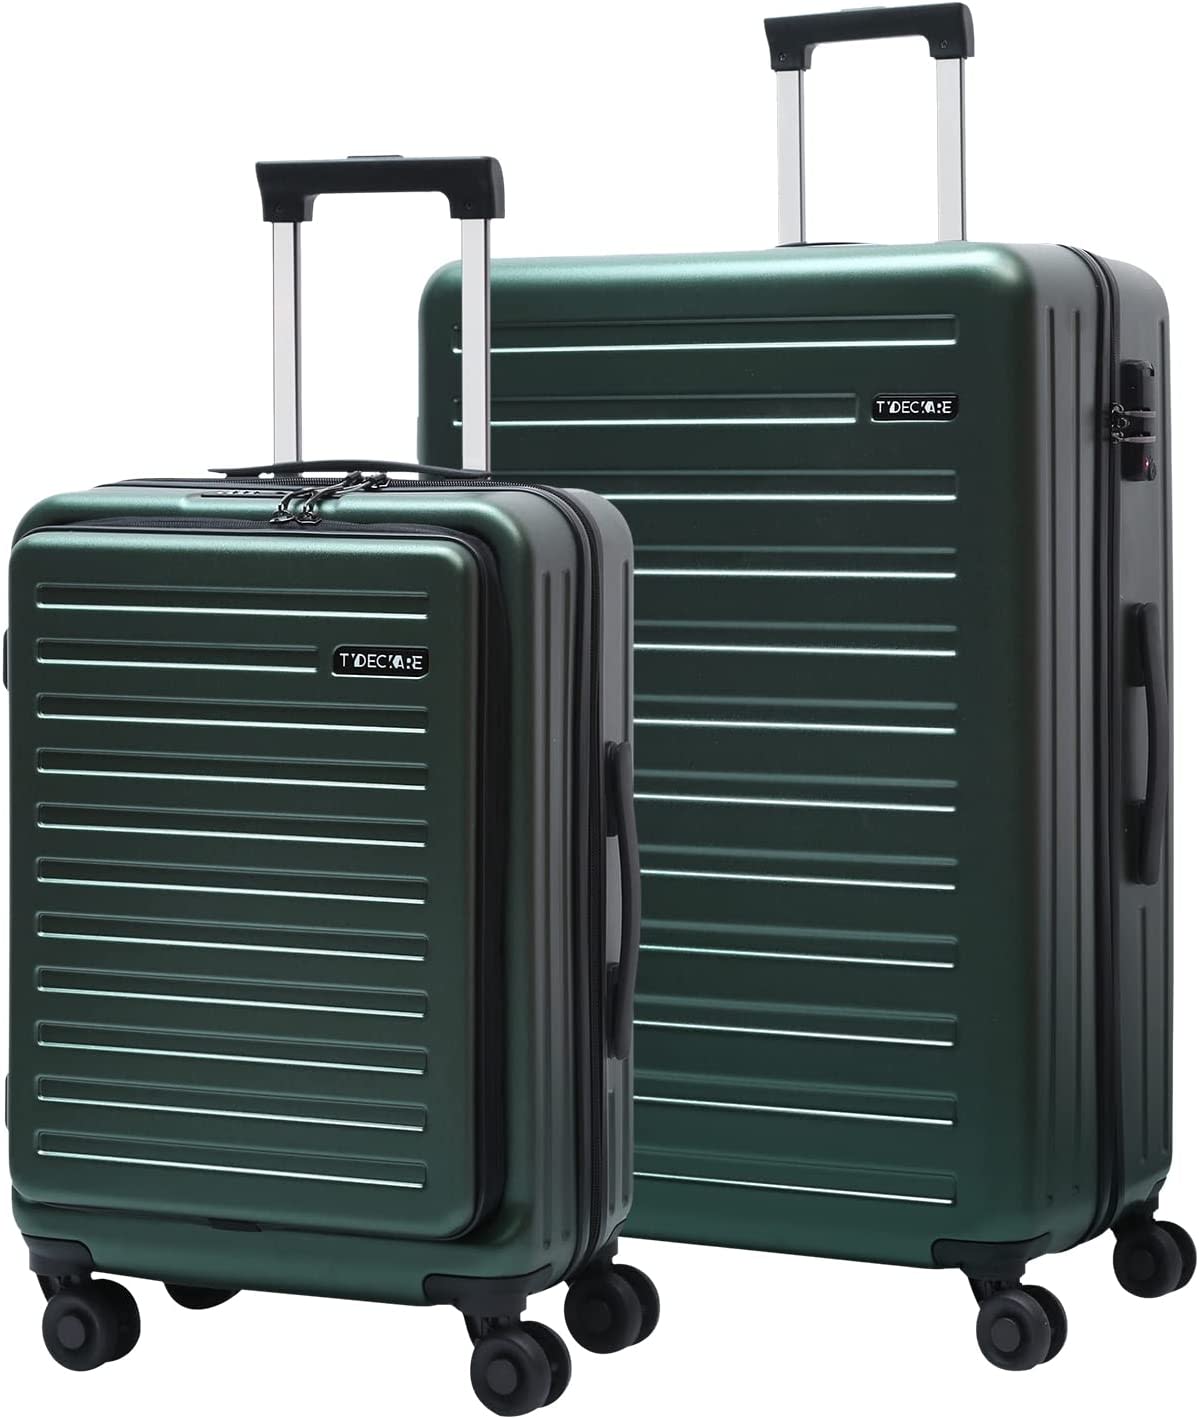 TydeCkare Carry on Luggage